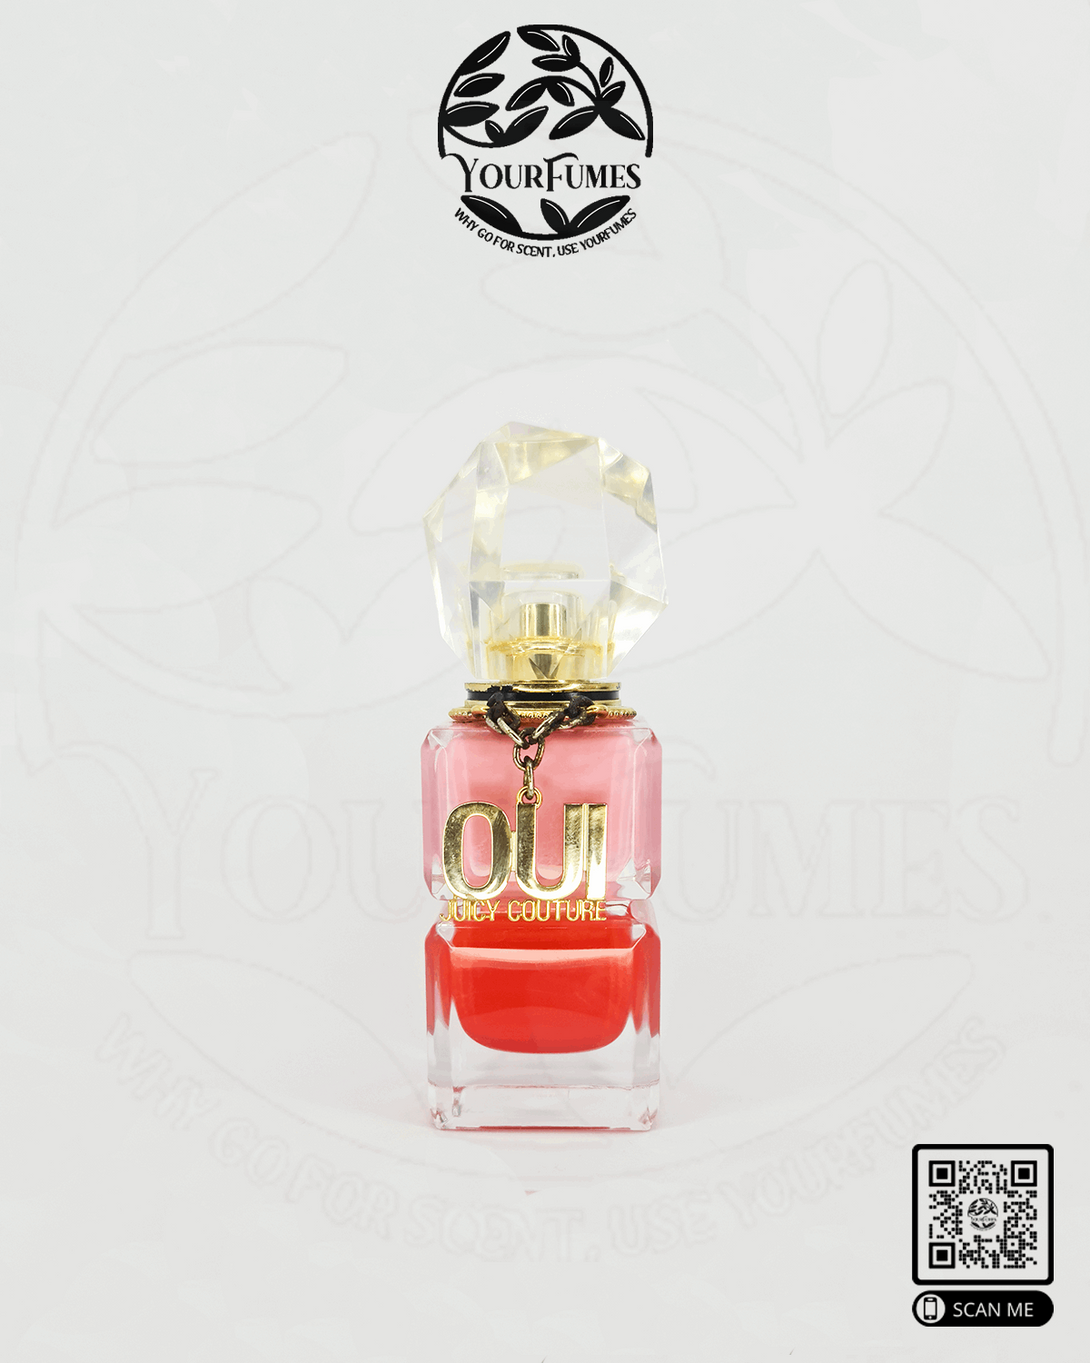 Juicy Couture Oui - Yourfumes